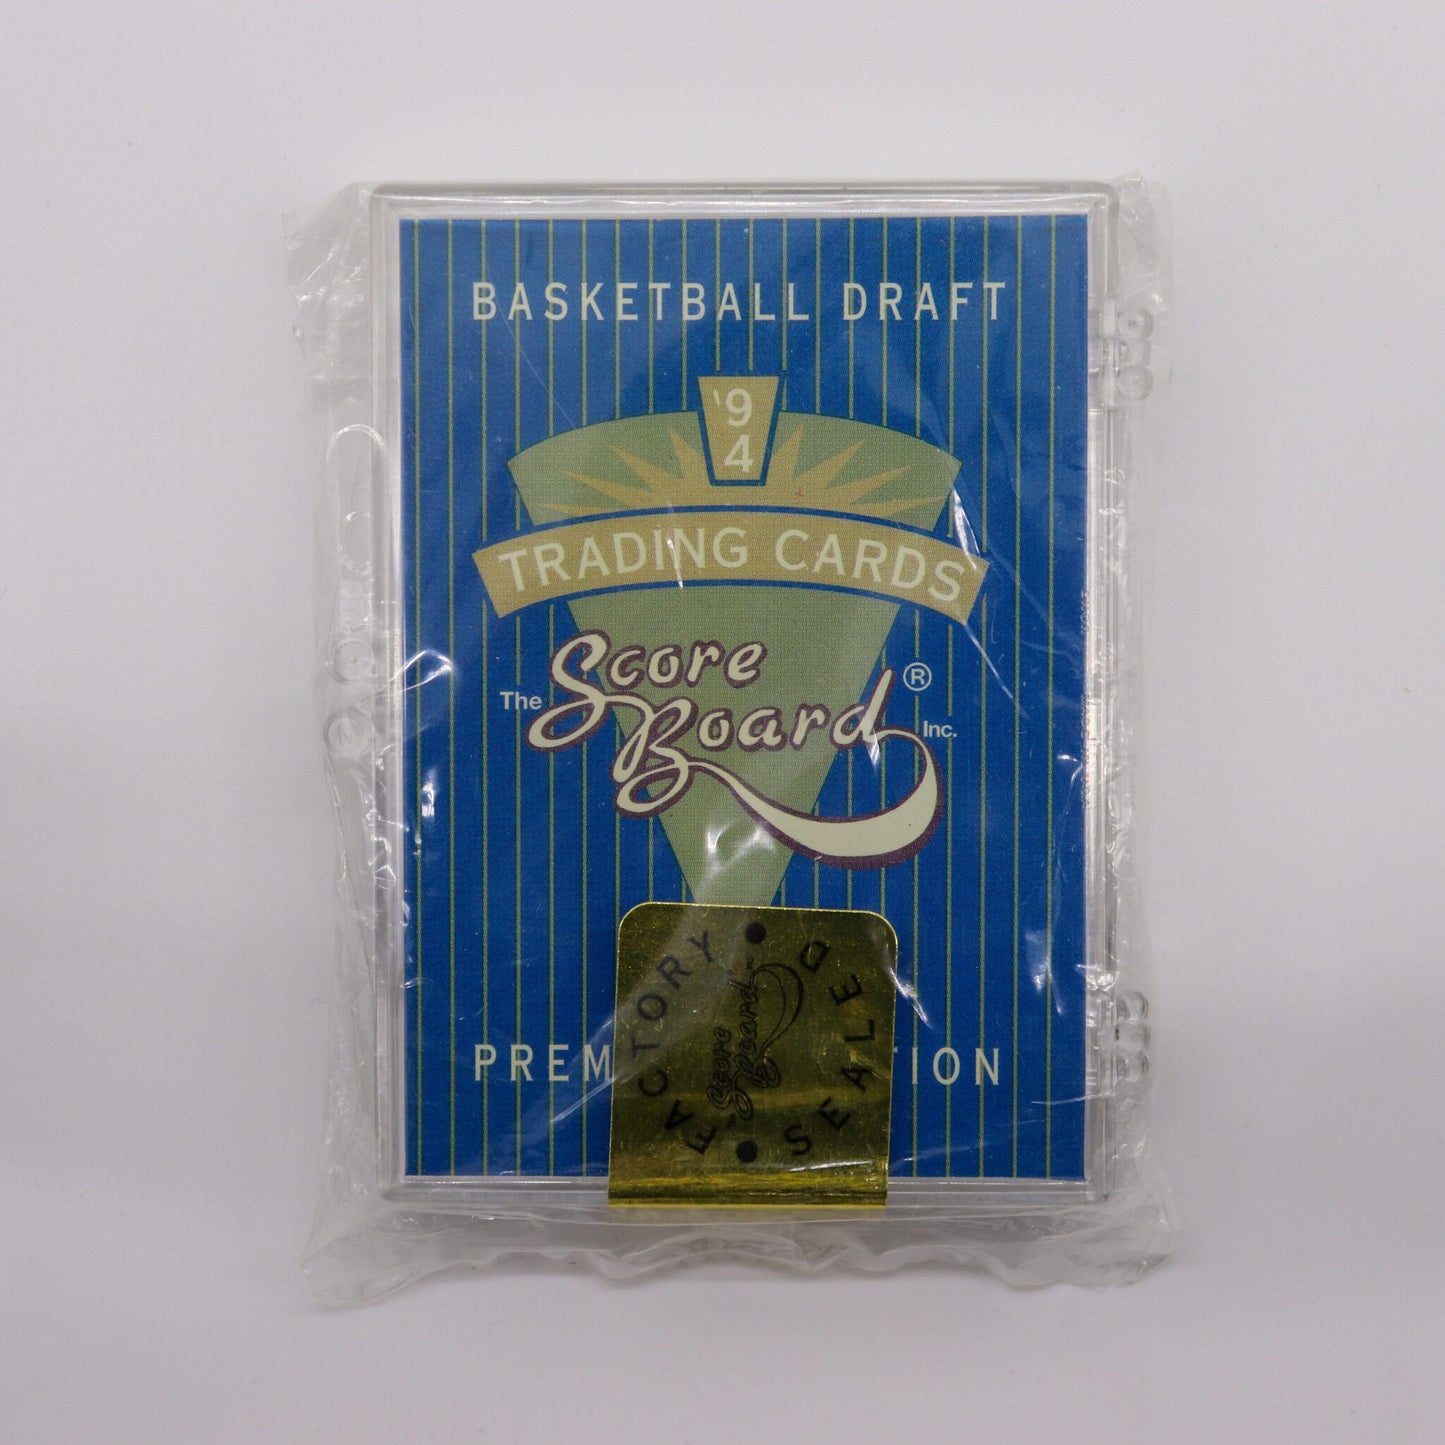 1994 Score Board Basketball Draft Trading Cards Complete Set, Sealed (New)